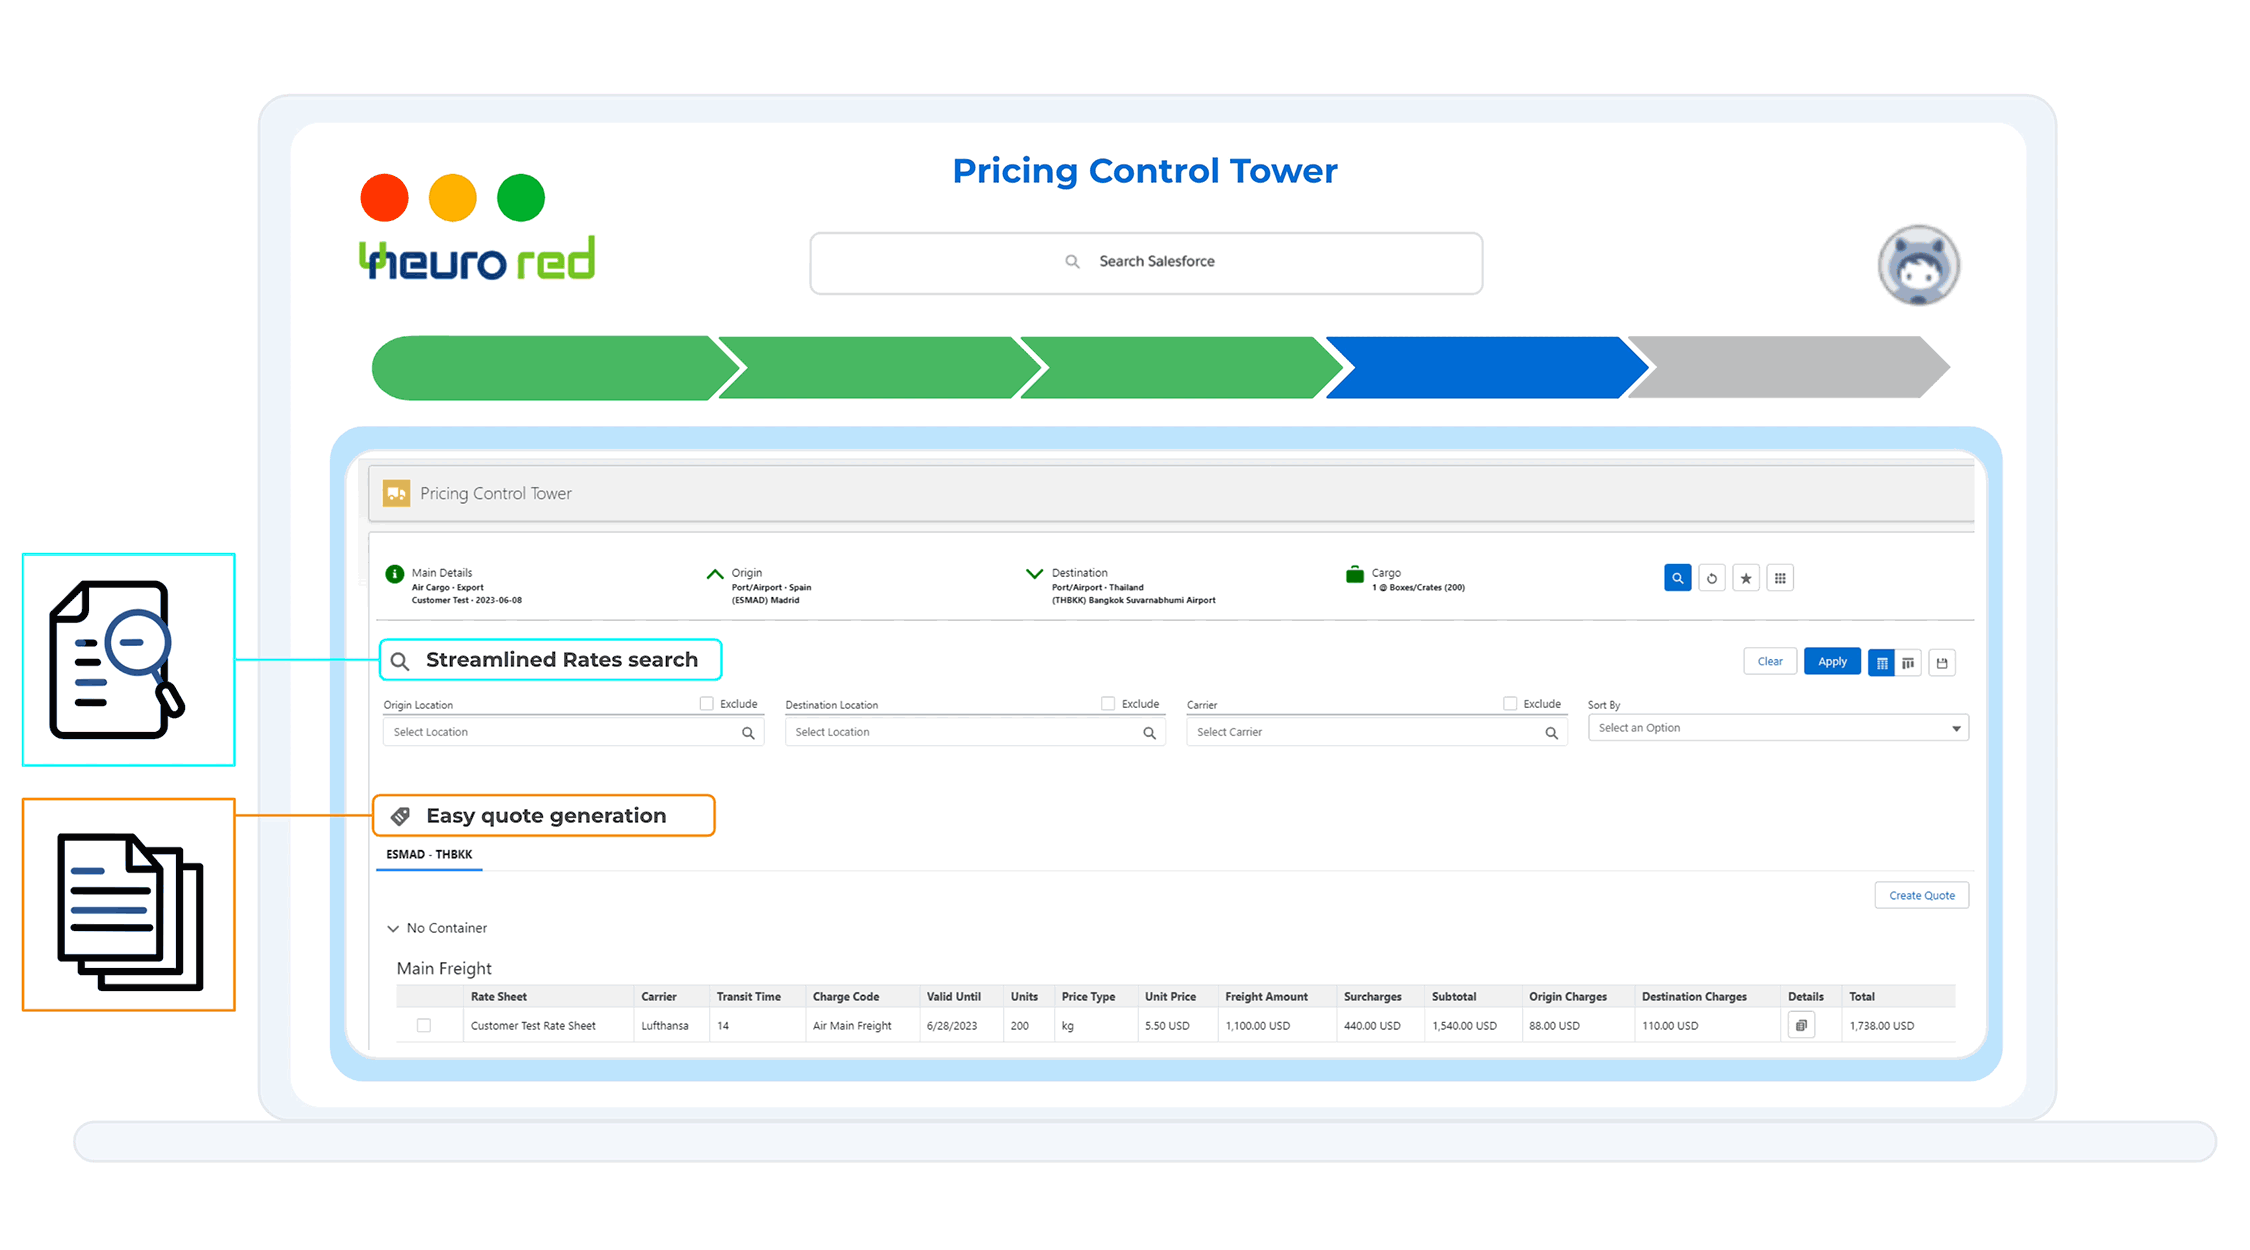 Introducing the Pricing Control Tower